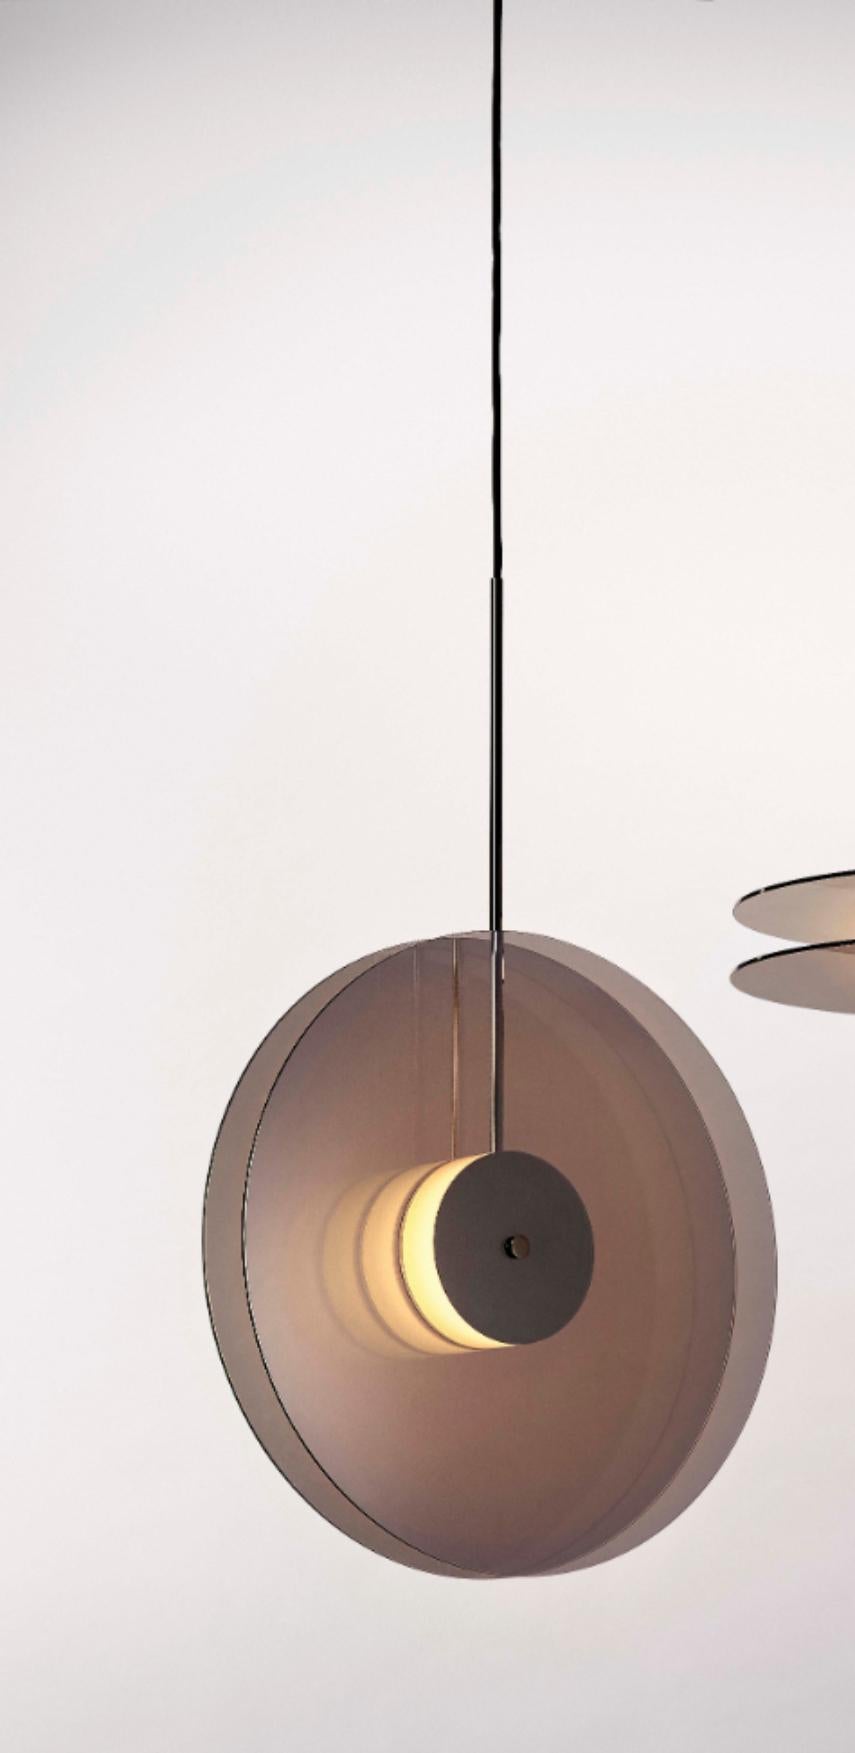 Set of 2 eclipse pendant light by Dechem Studio
Dimensions: D 50 x H 200 cm
Materials: brass, glass.

Inspired by the 1930s modernist design and Art Deco, Eclipse lamp is comprised of two metallized glass discs with a source of soft light behind